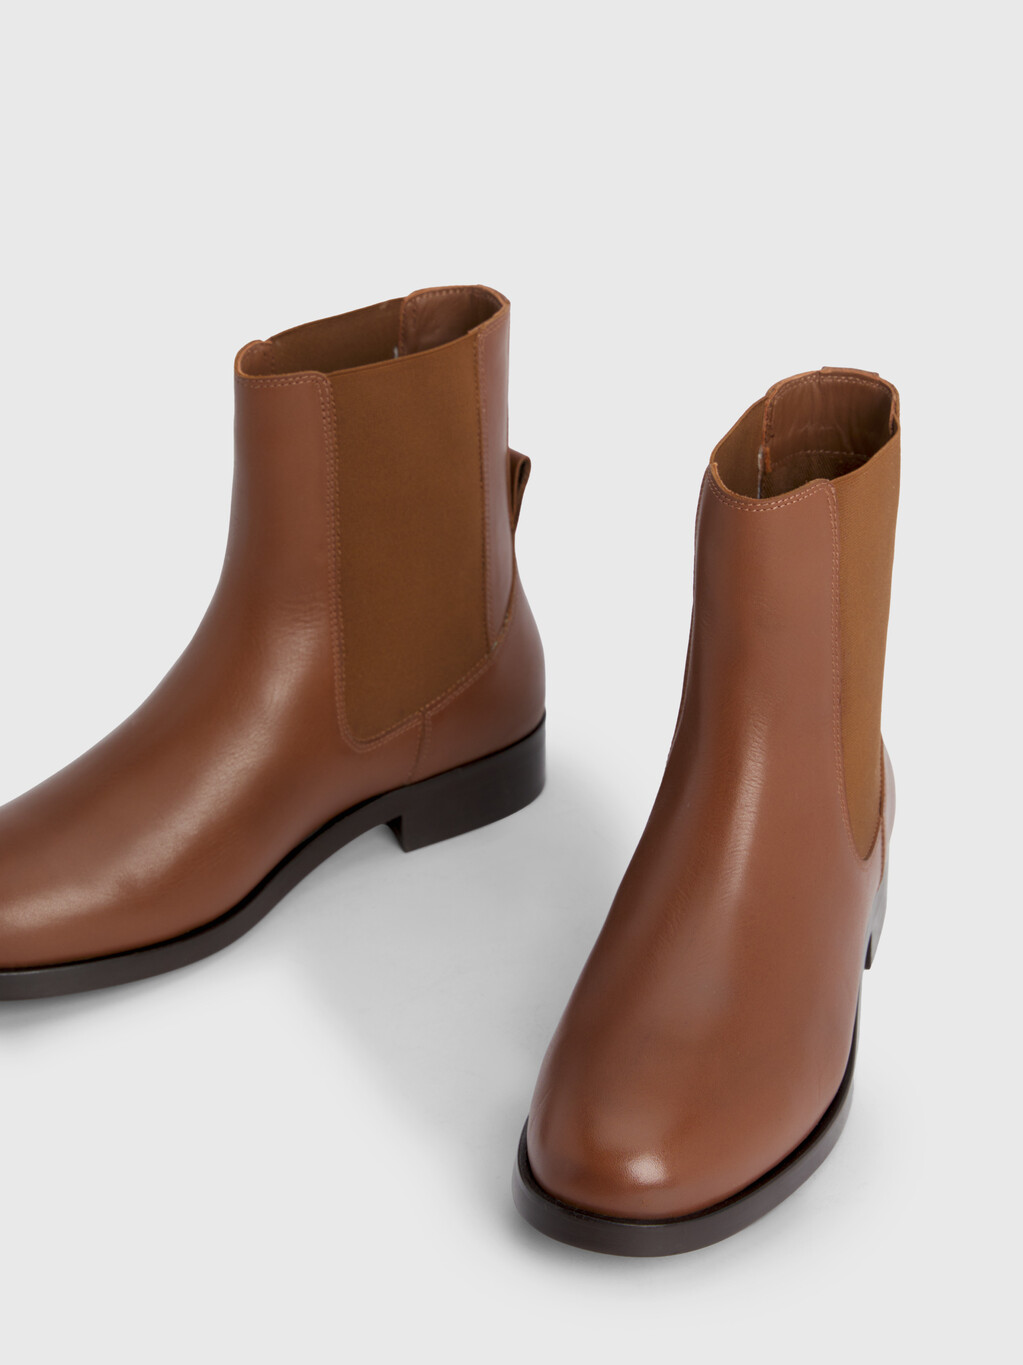 Elevated Essential Leather Ankle Boots, Natural Cognac, hi-res